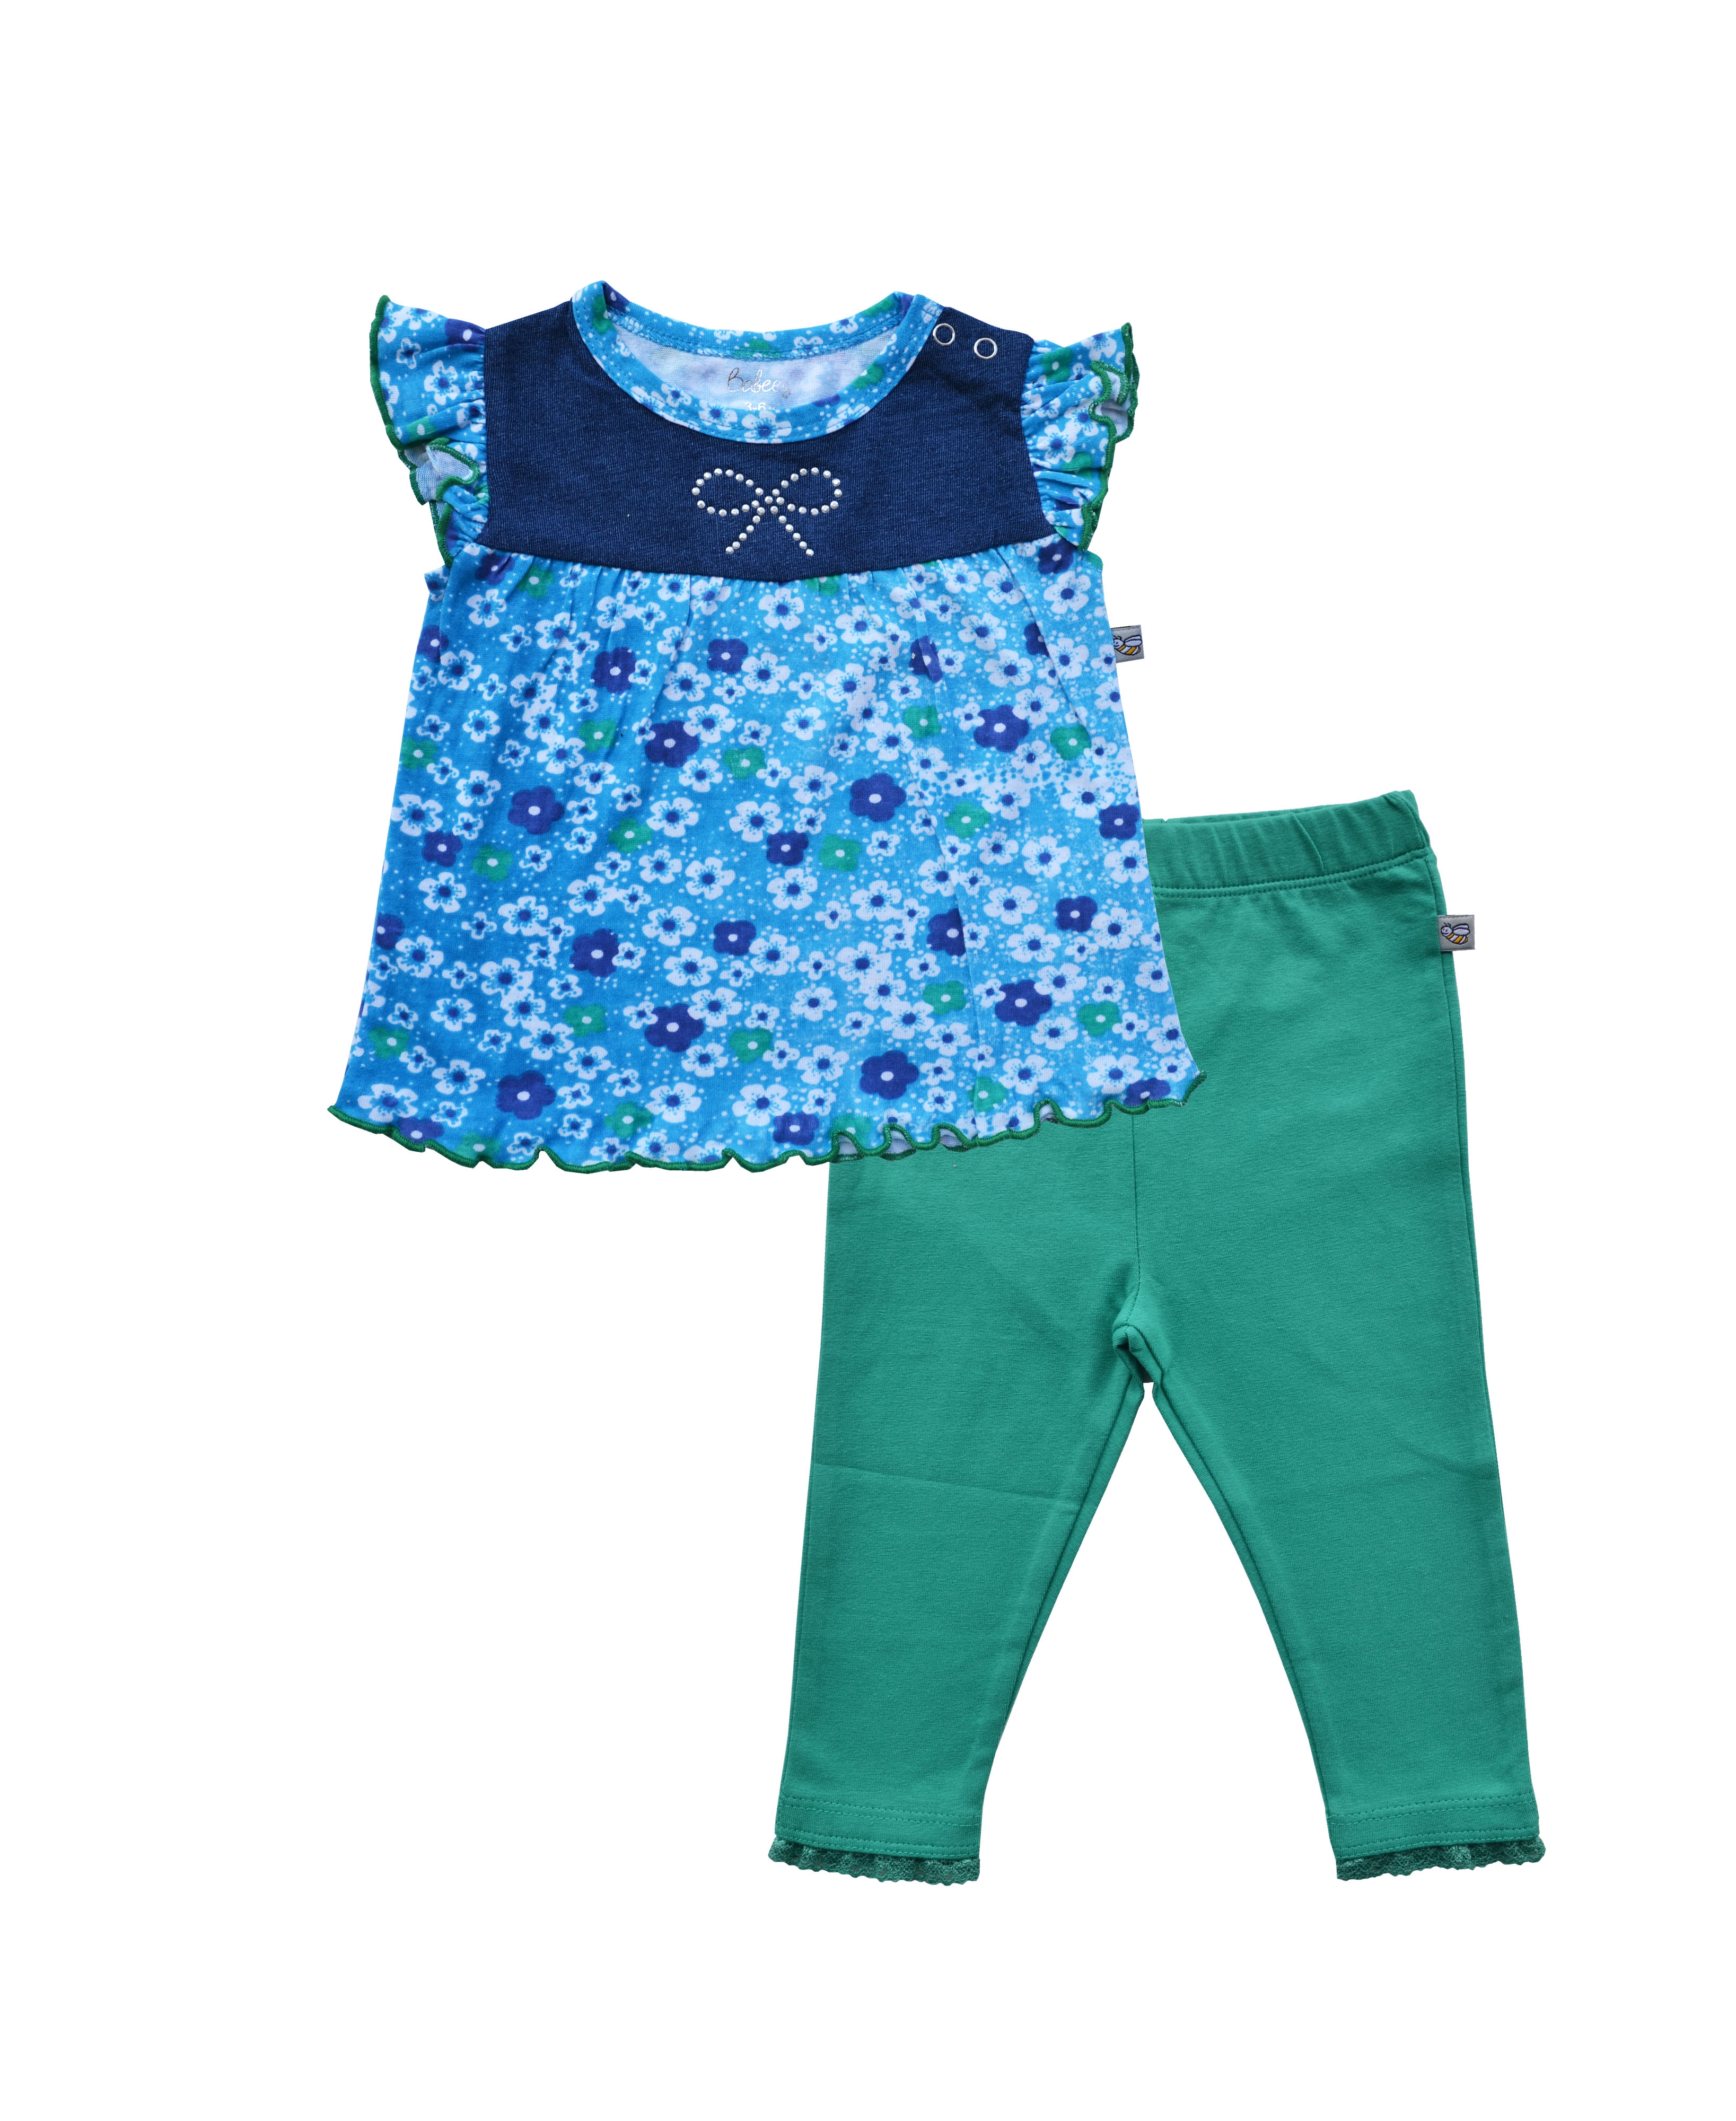 Allover Flower Print on Blue Top and Dark Green Solid Leggings (100% Cotton Jersey)